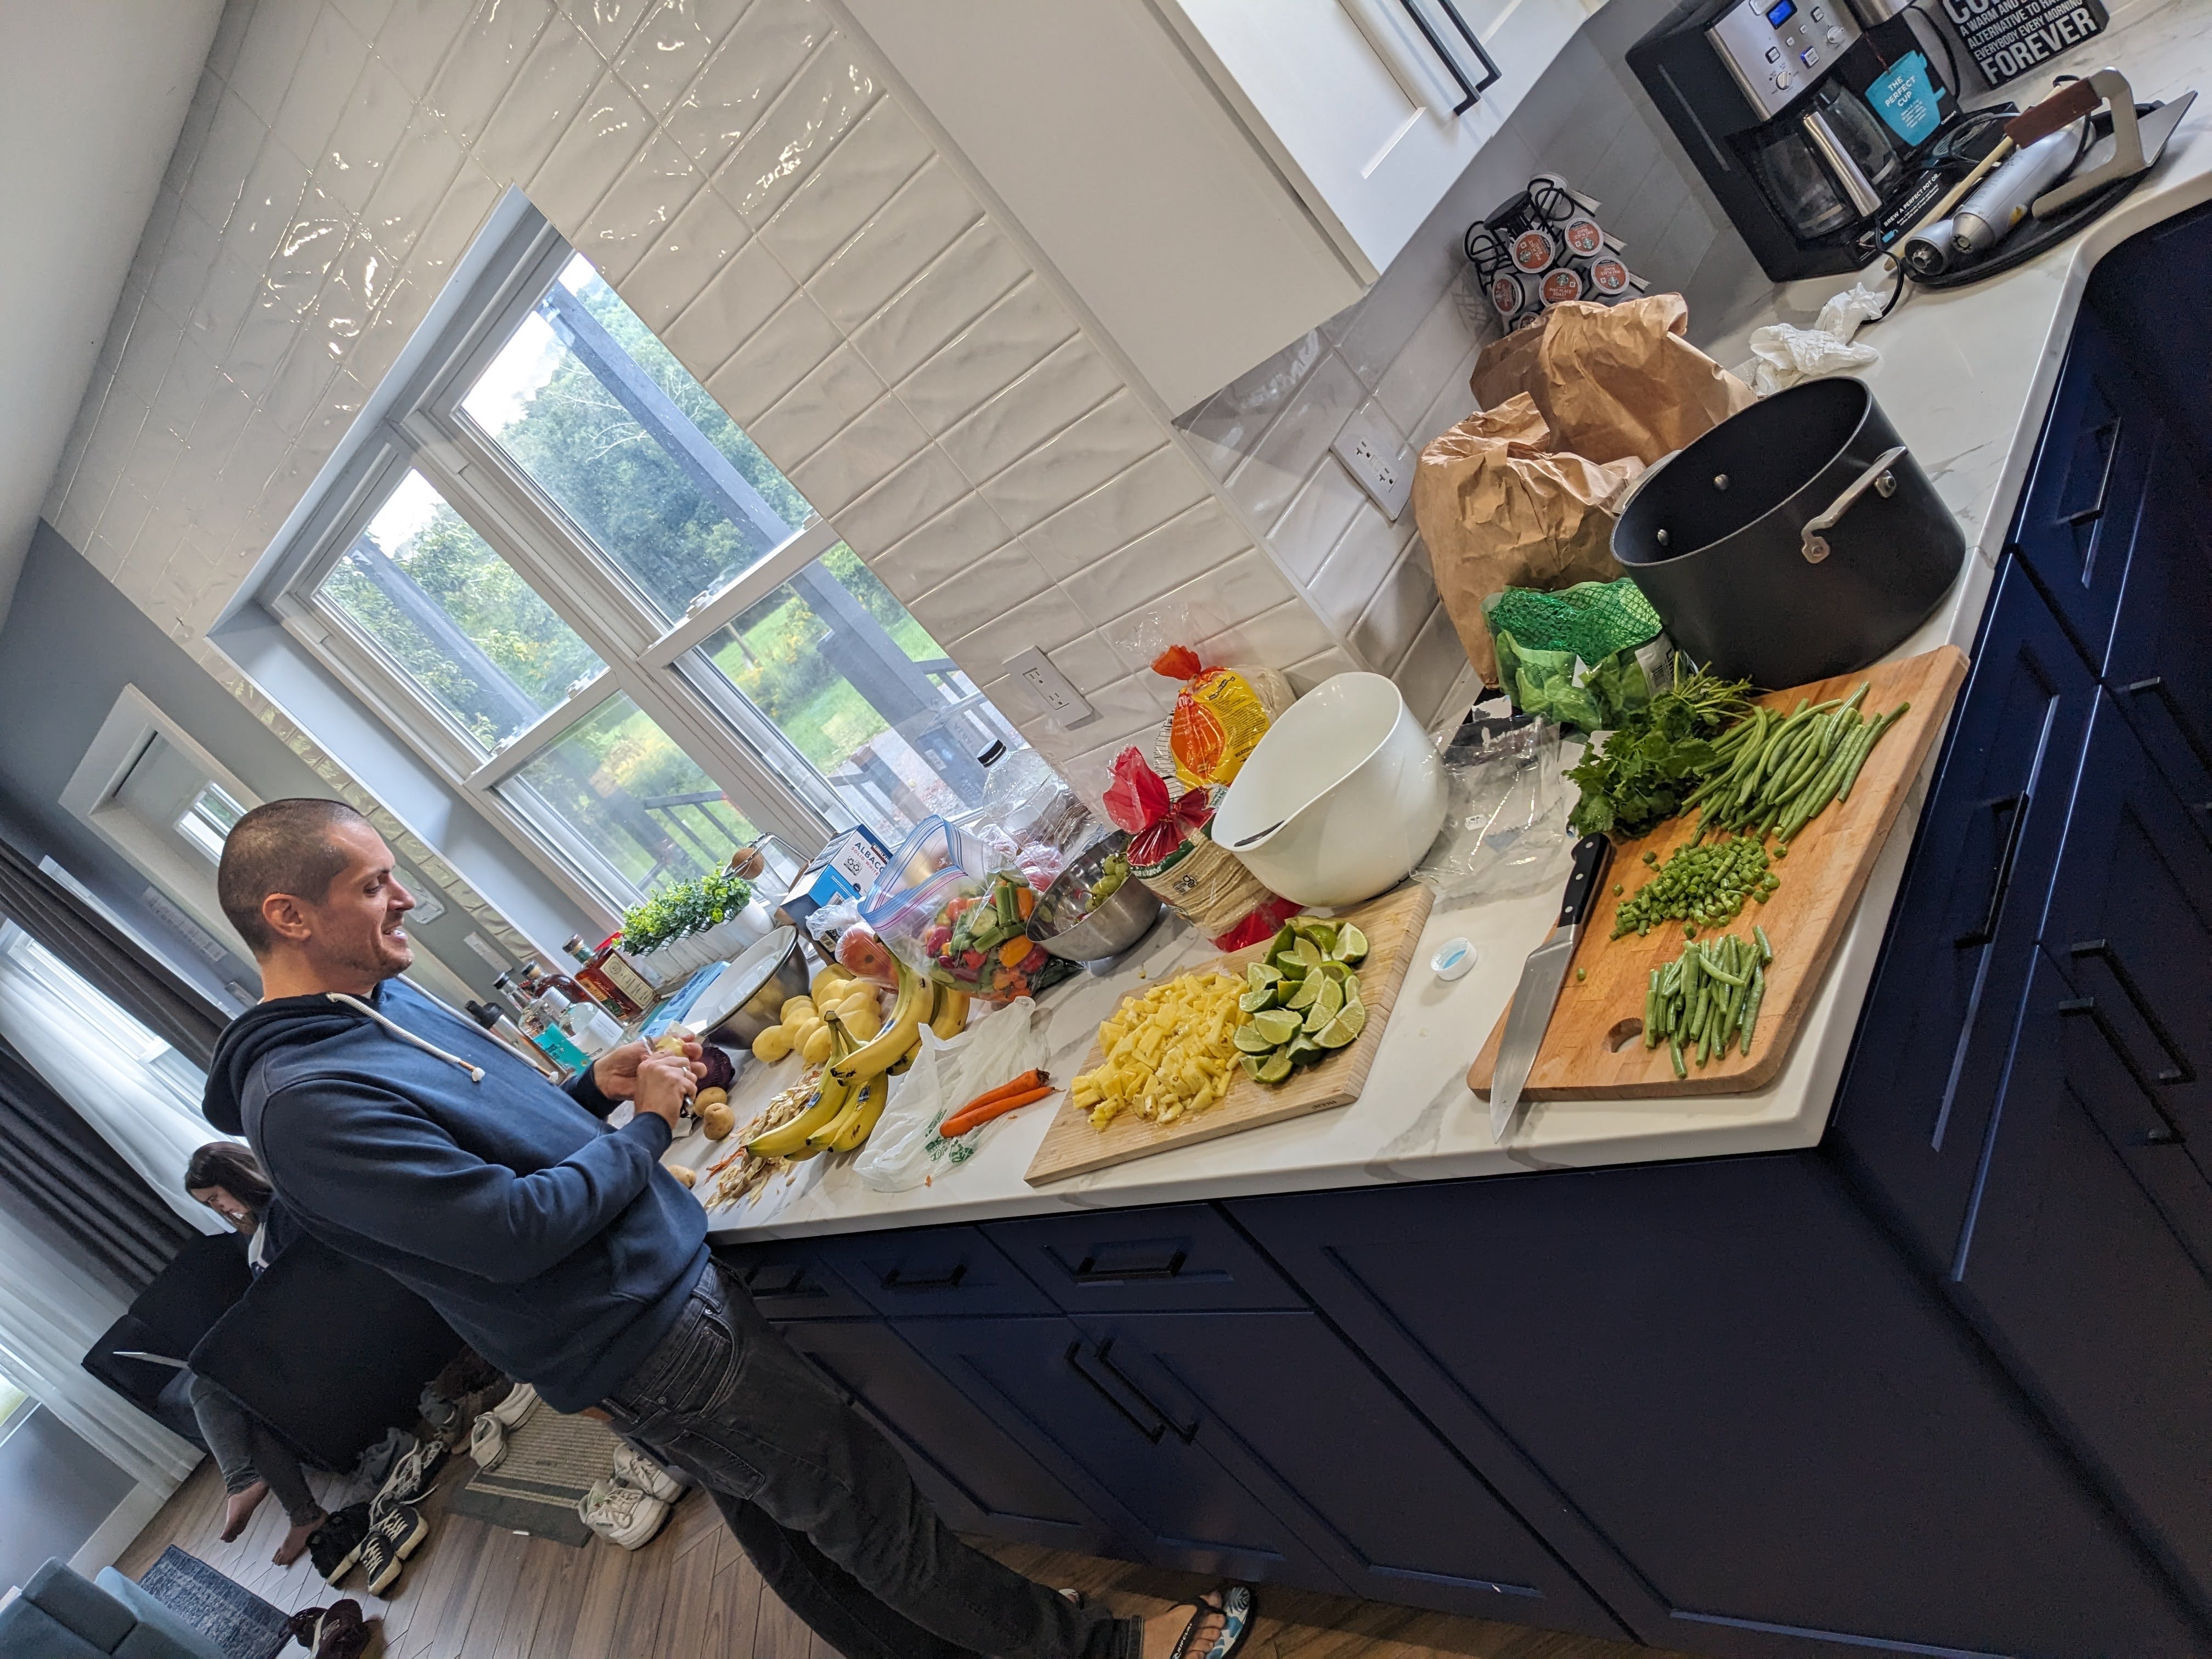 An AuthZedder at a kitchen counter surrounded by chopped vegetables